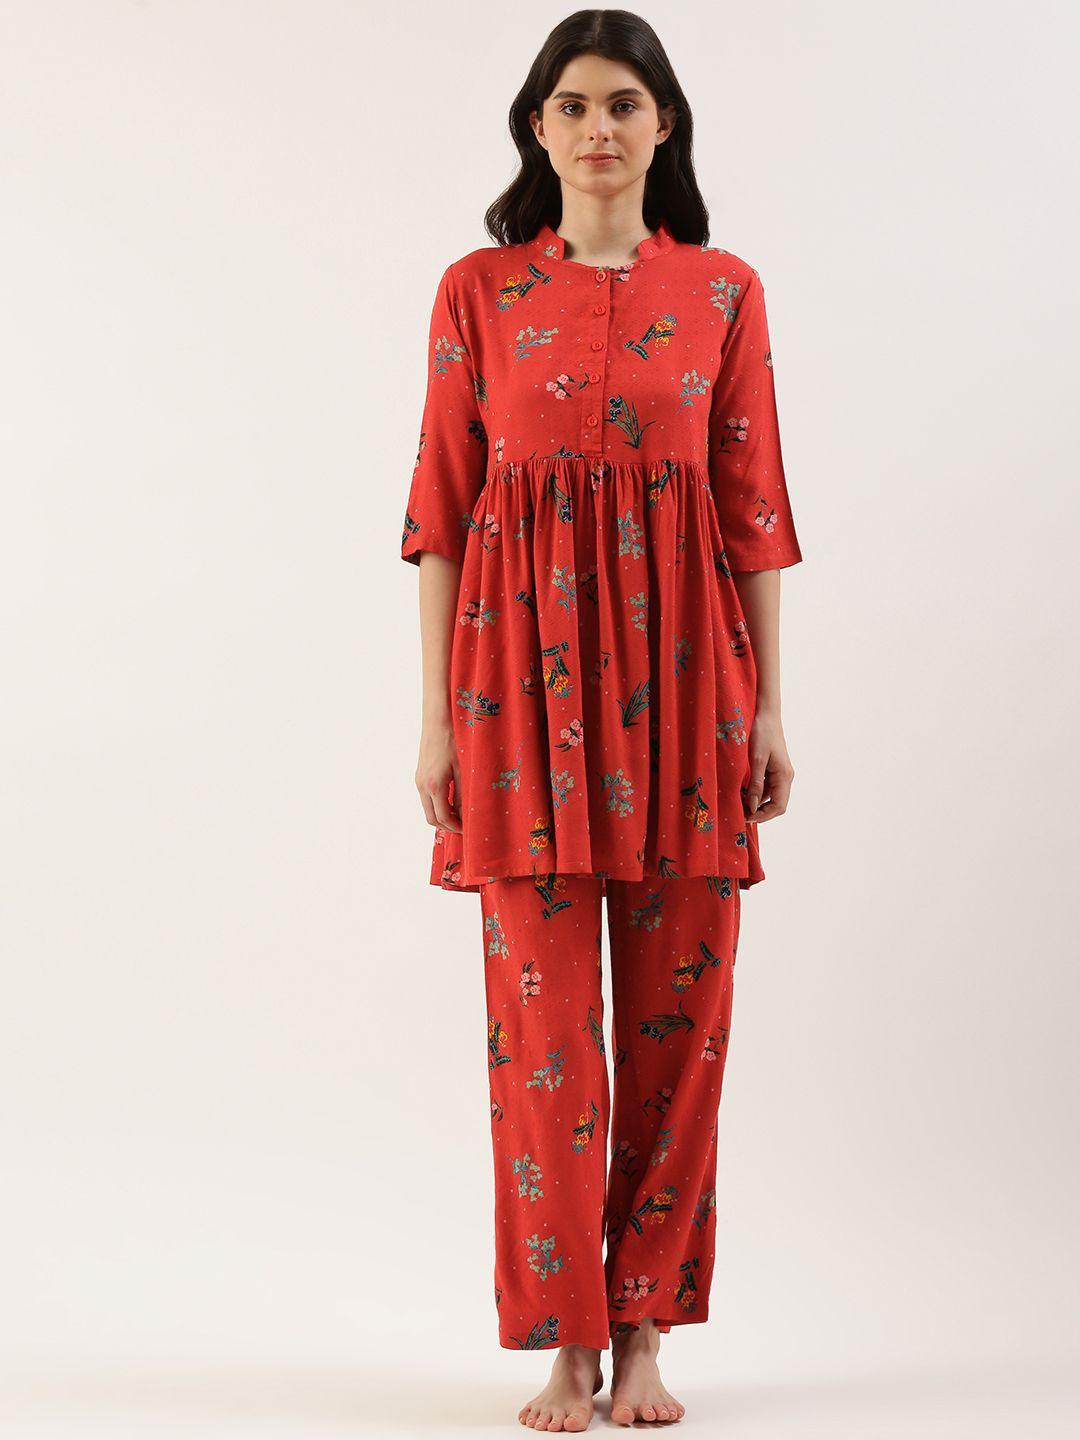 clt s floral printed night suit